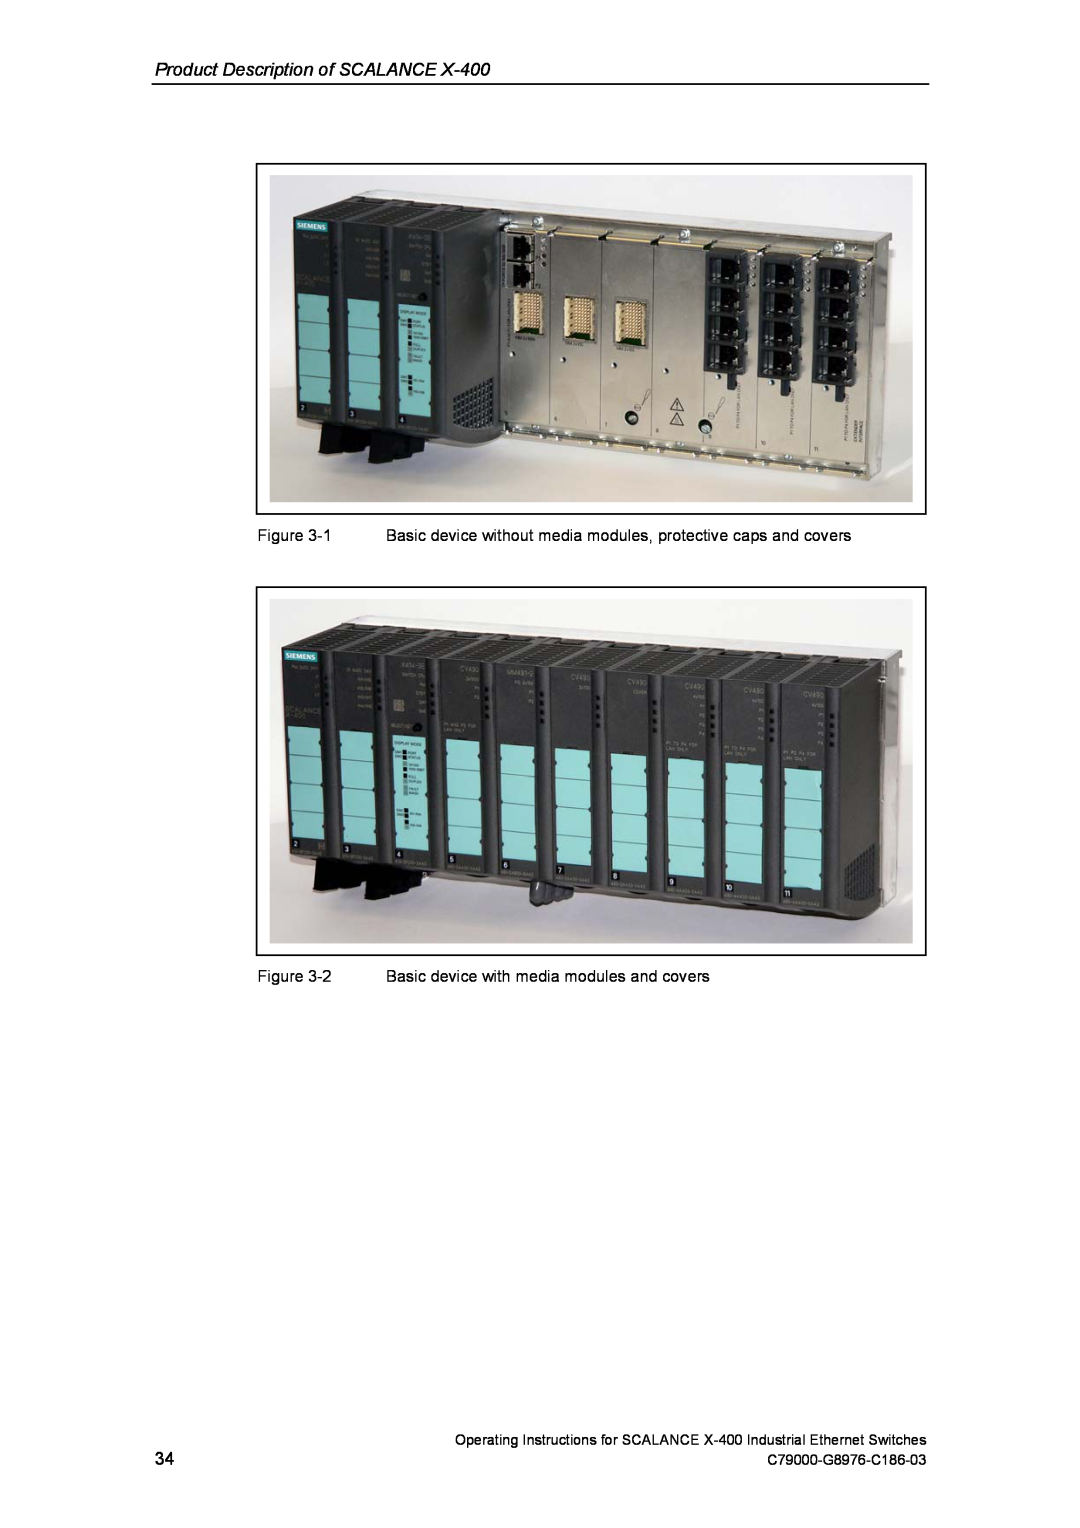 Siemens X-400 Product Description of SCALANCE, 2 Basic device with media modules and covers, C79000-G8976-C186-03 